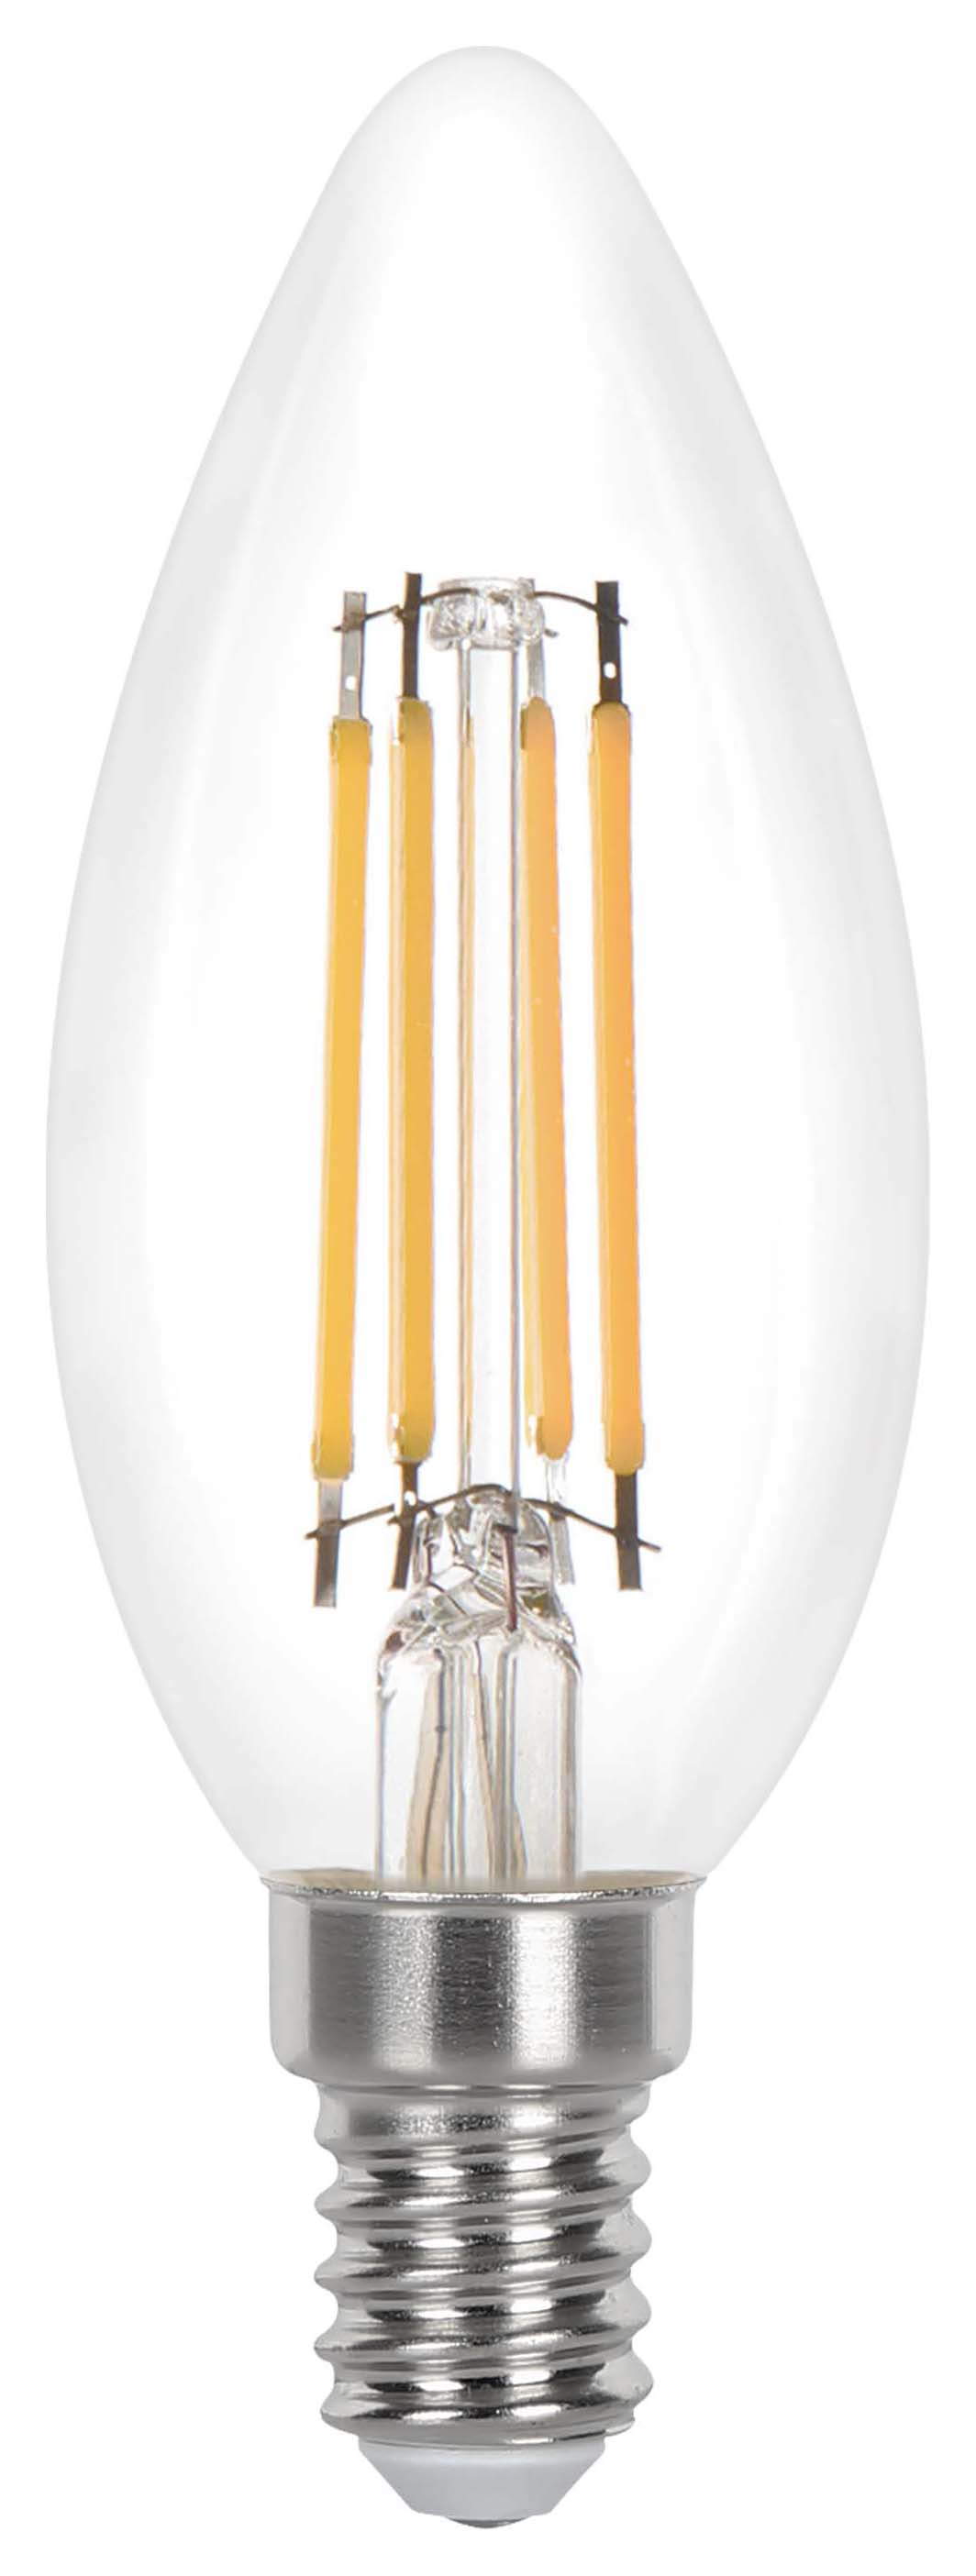 Image of Wickes Dimmable Filament E14 Candle 3.4W Warm White Light Bulb